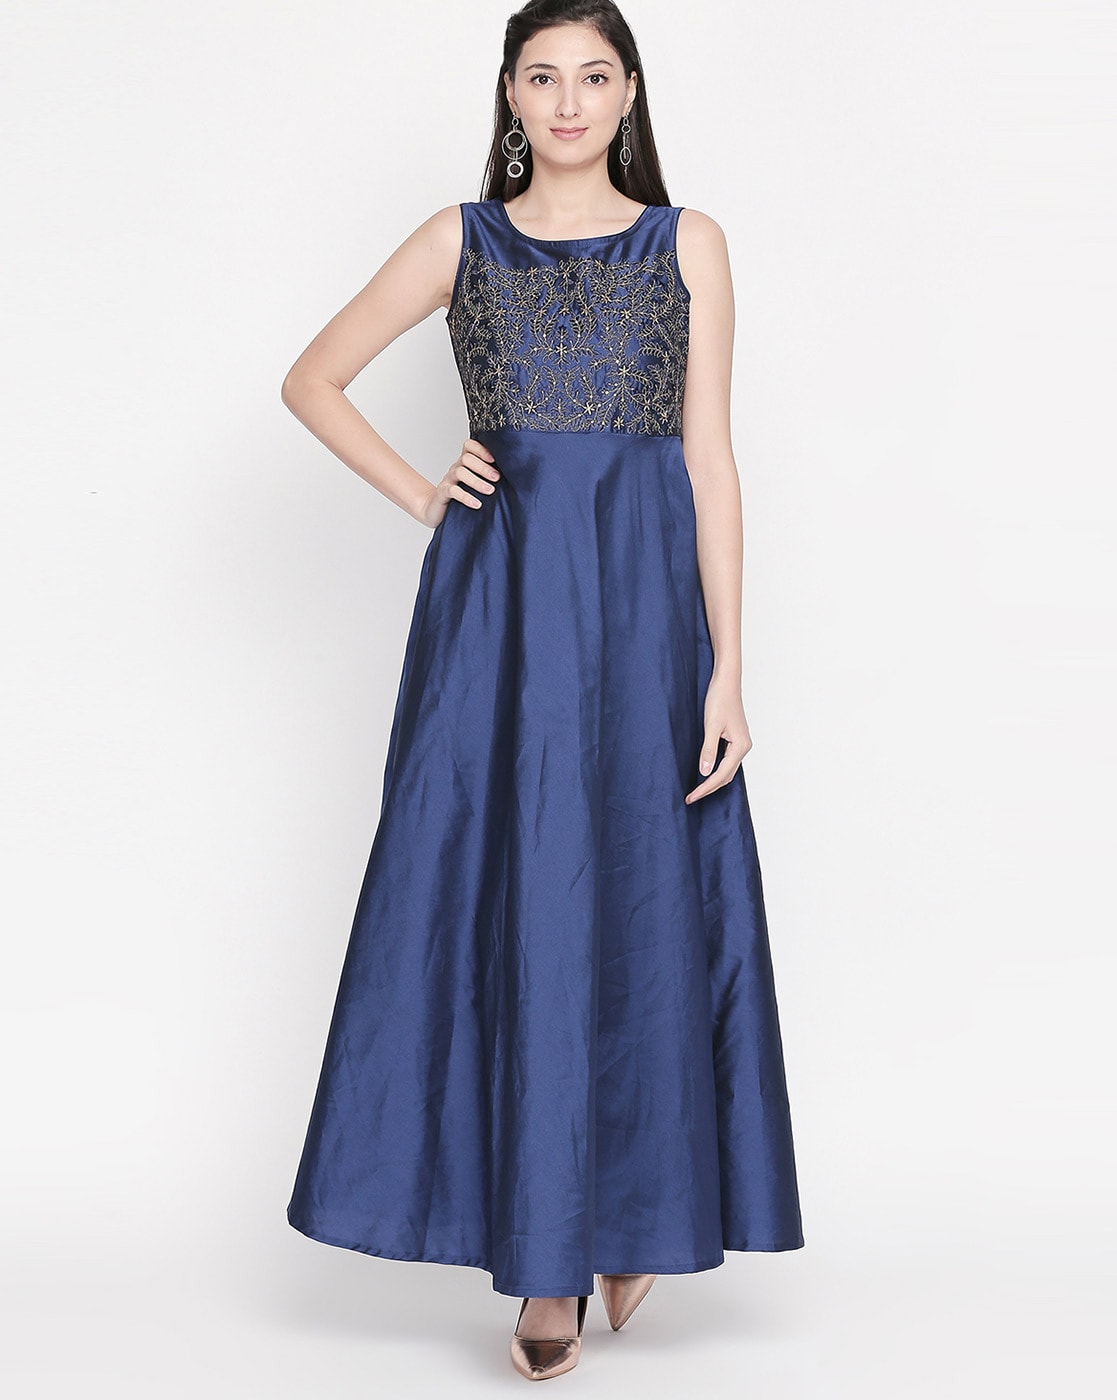 Desi Weavess Ethnic Dresses : Buy Desi Weavess Navy Blue Embroidered Dress  Online | Nykaa Fashion.